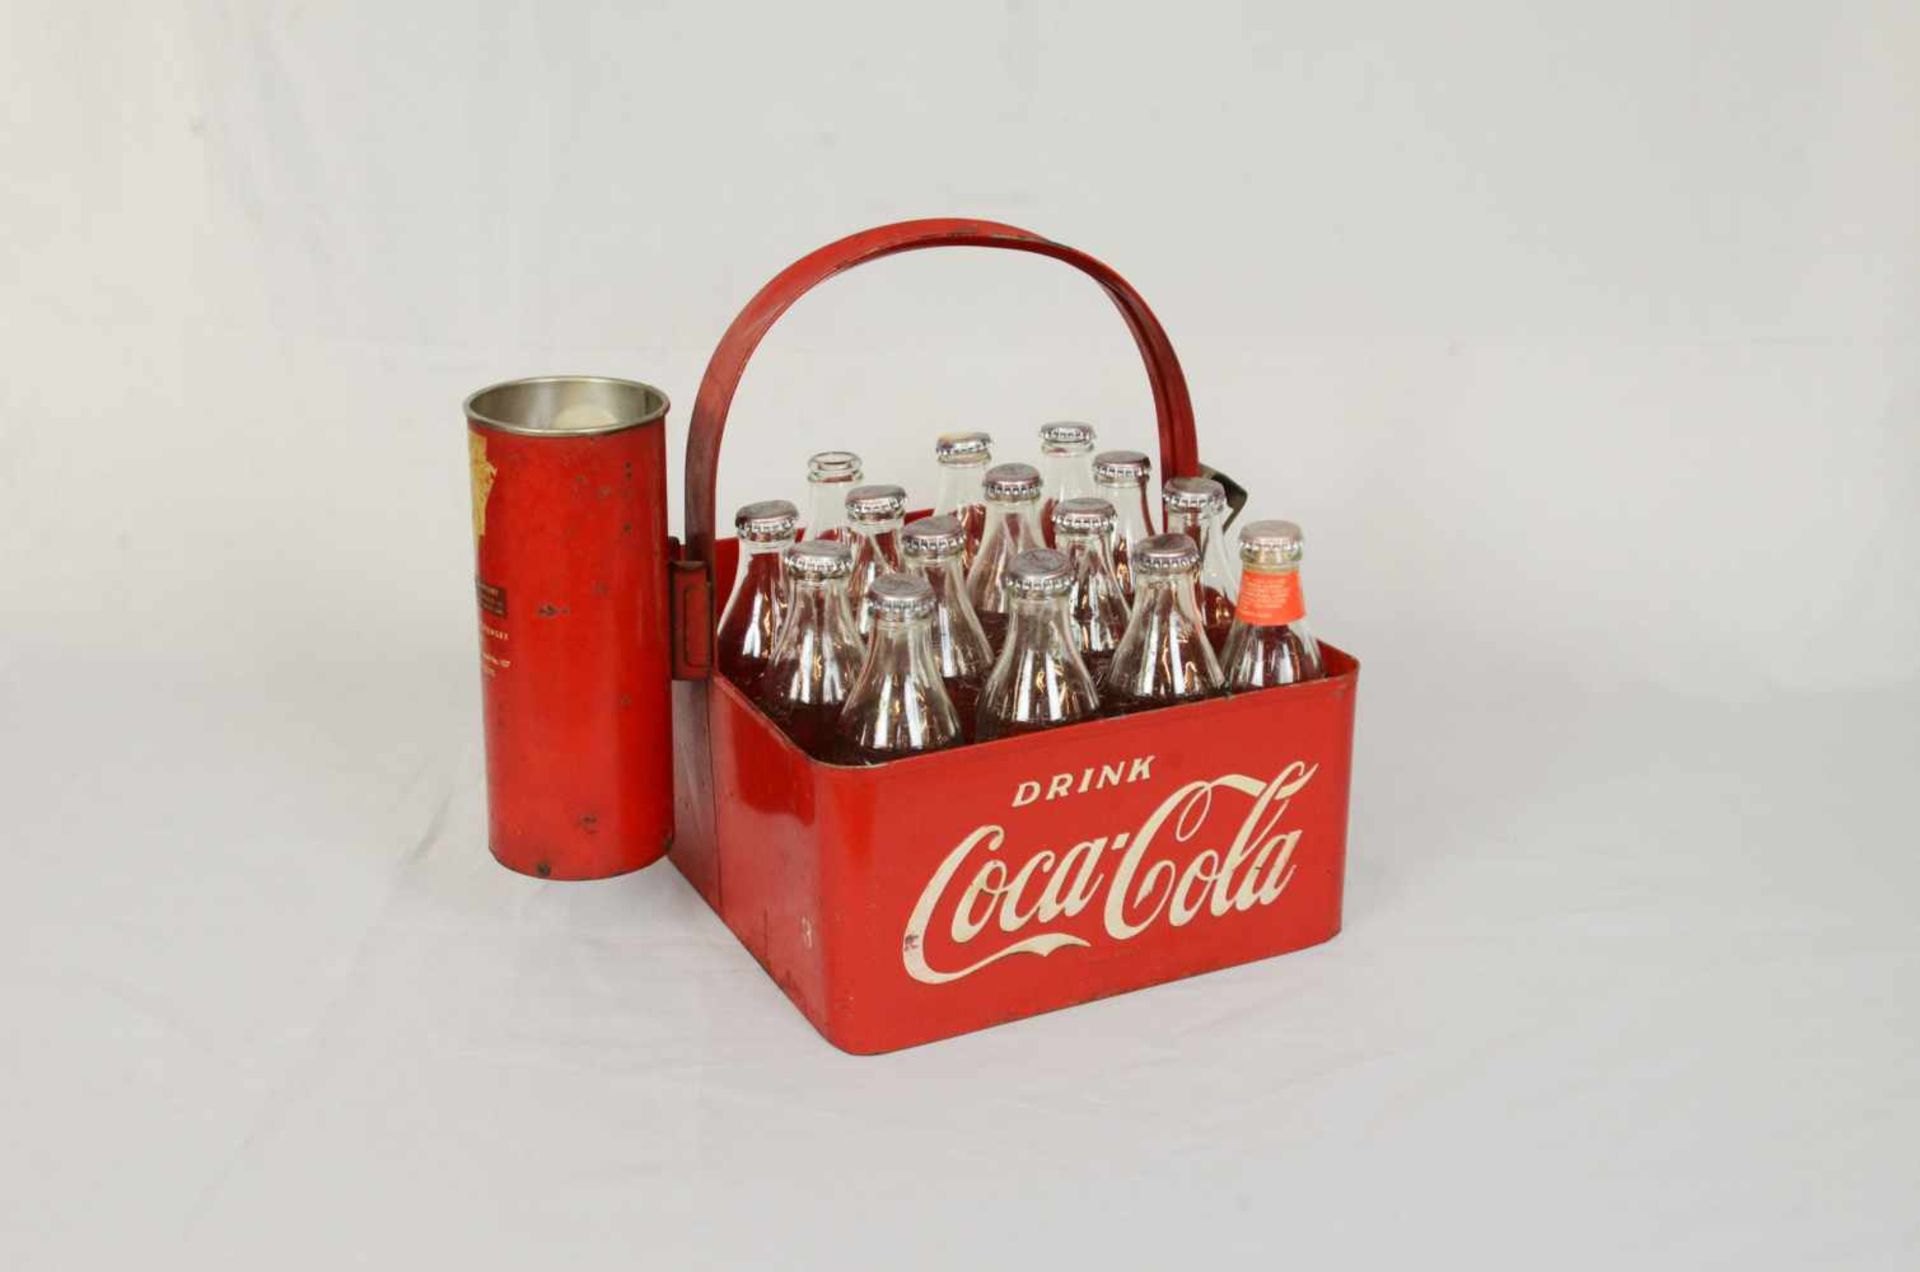 1950's Coca-Cola bottle carrier1950's Coca-Cola bottle carrier with bottle opener and inverted Dixie